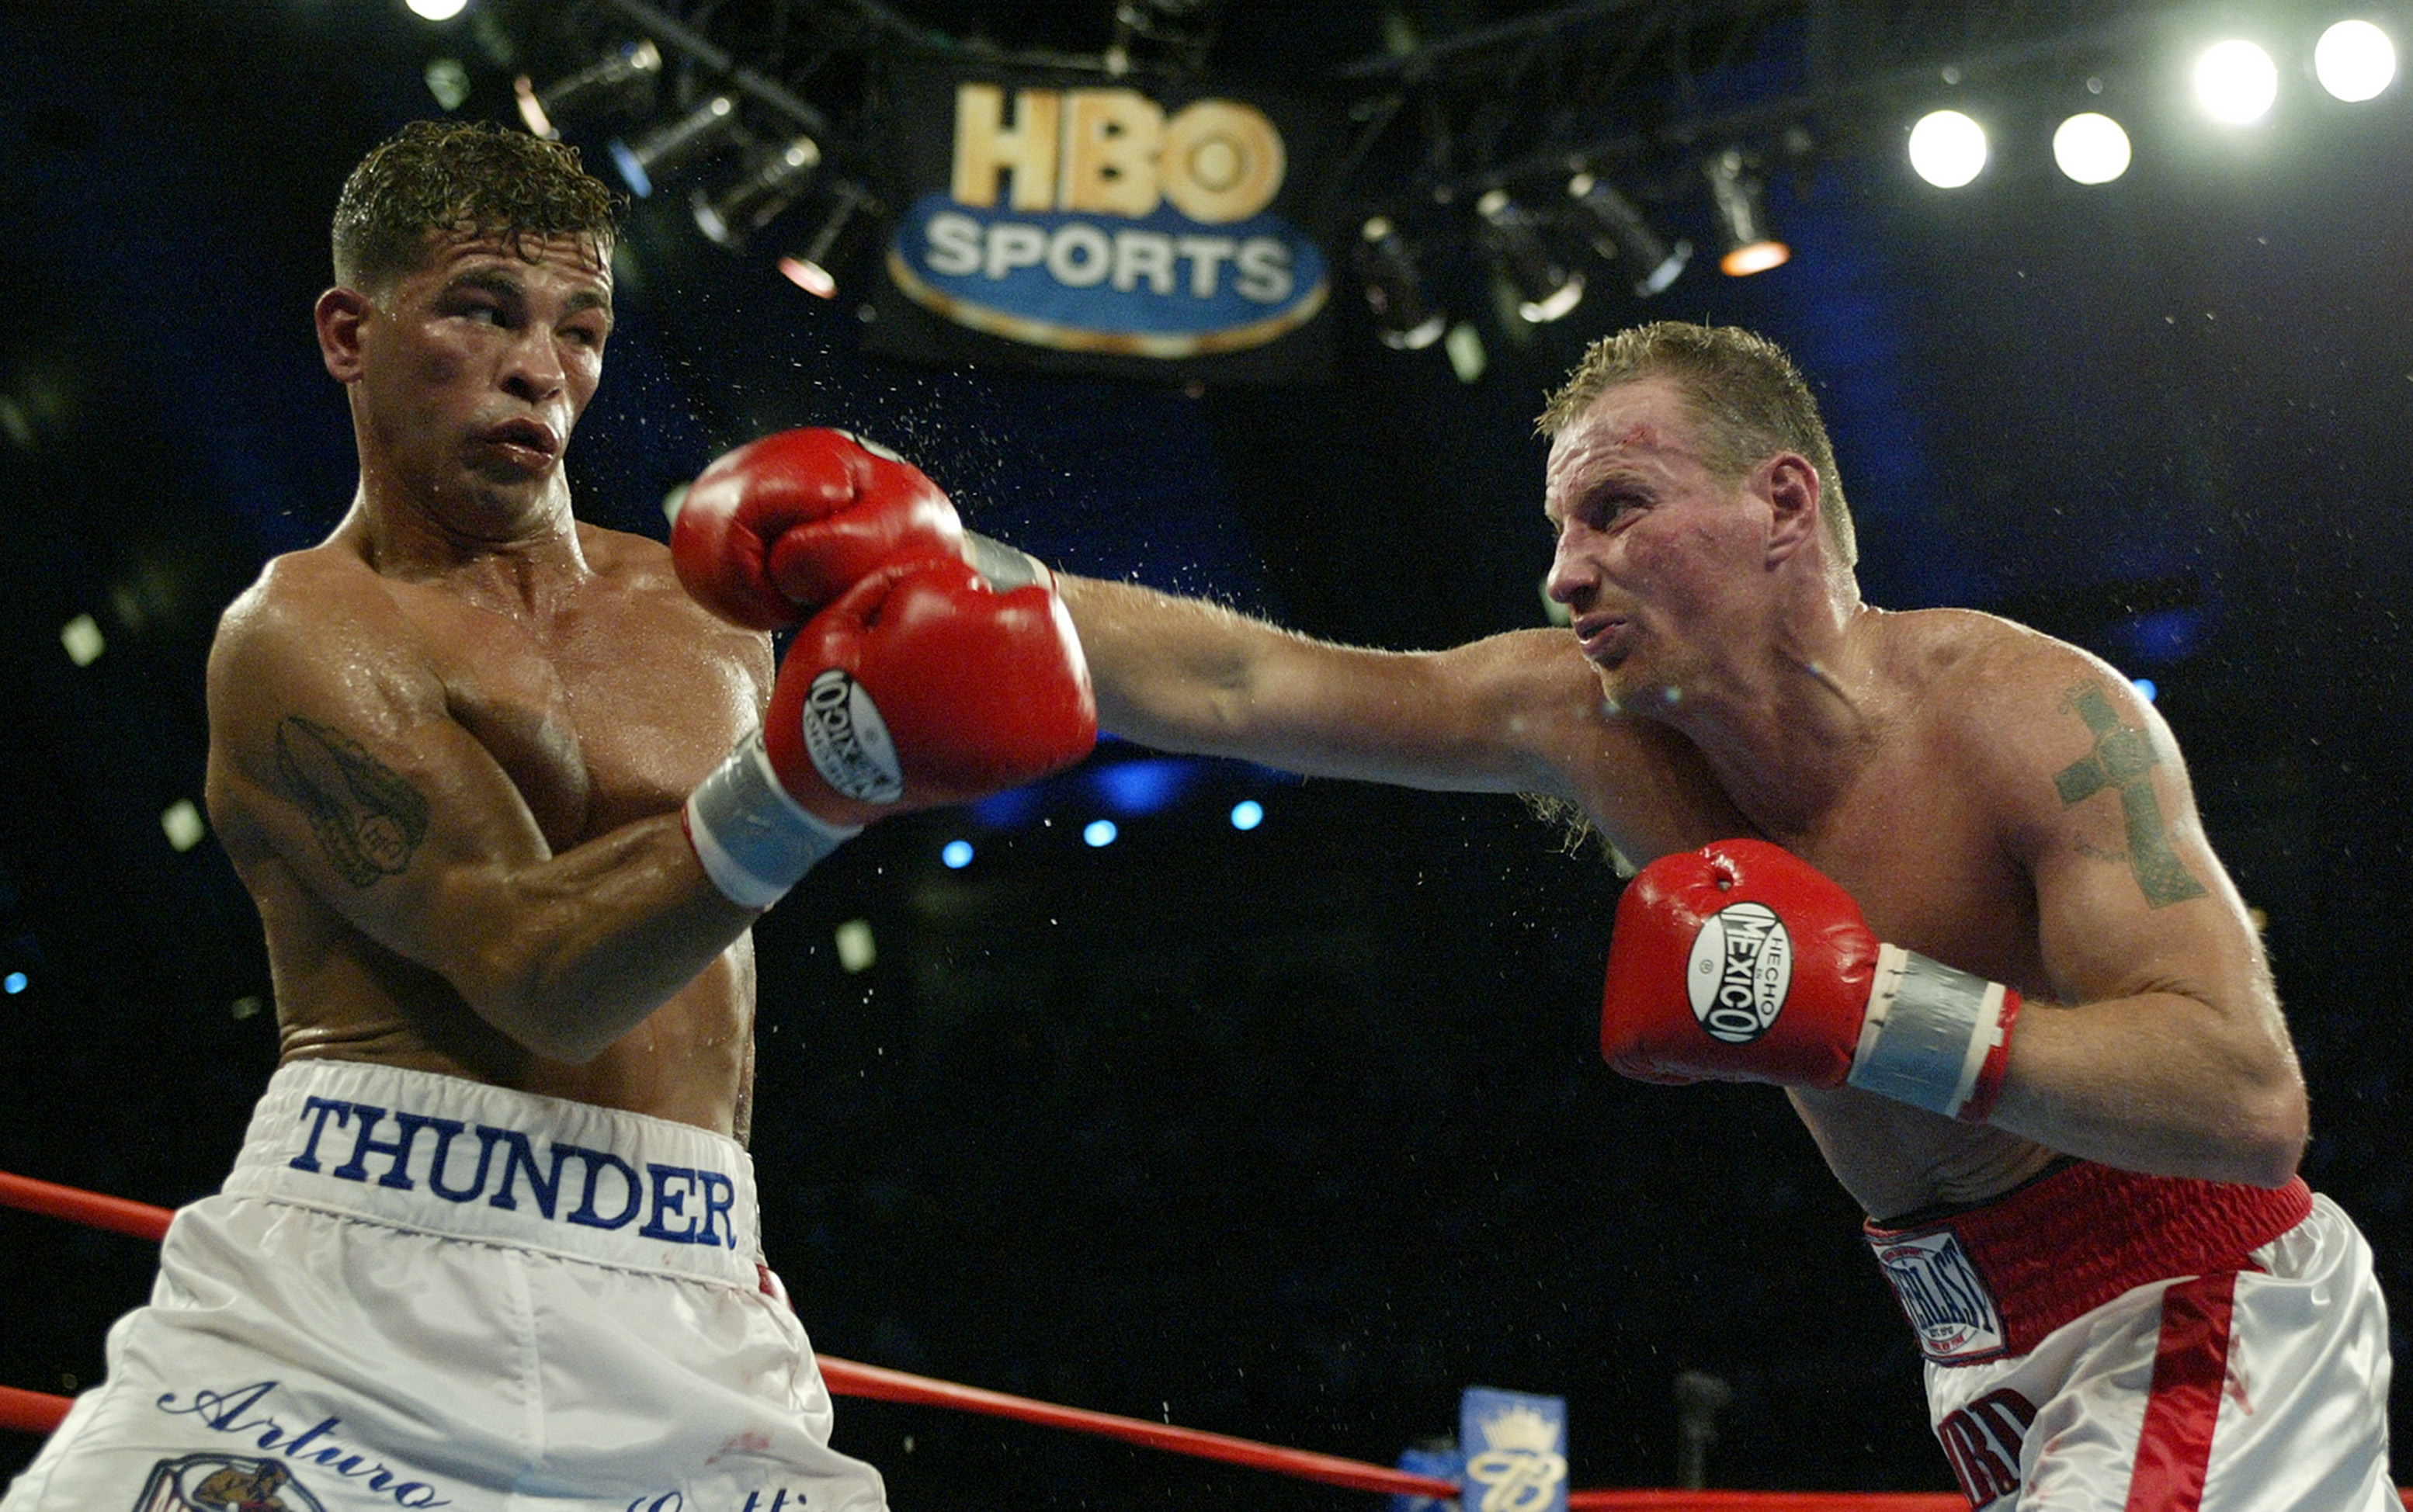 ATLANTIC CITY, NJ - JUNE 7:  Arturo Gatti (L) and Micky Ward trade punches during their Junior Welterweight bout at Boardwalk Hall on June 7 in Atlantic City, New Jersey. Gatti won a unanimous decision.  (Photo by Al Bello/Getty  Images)